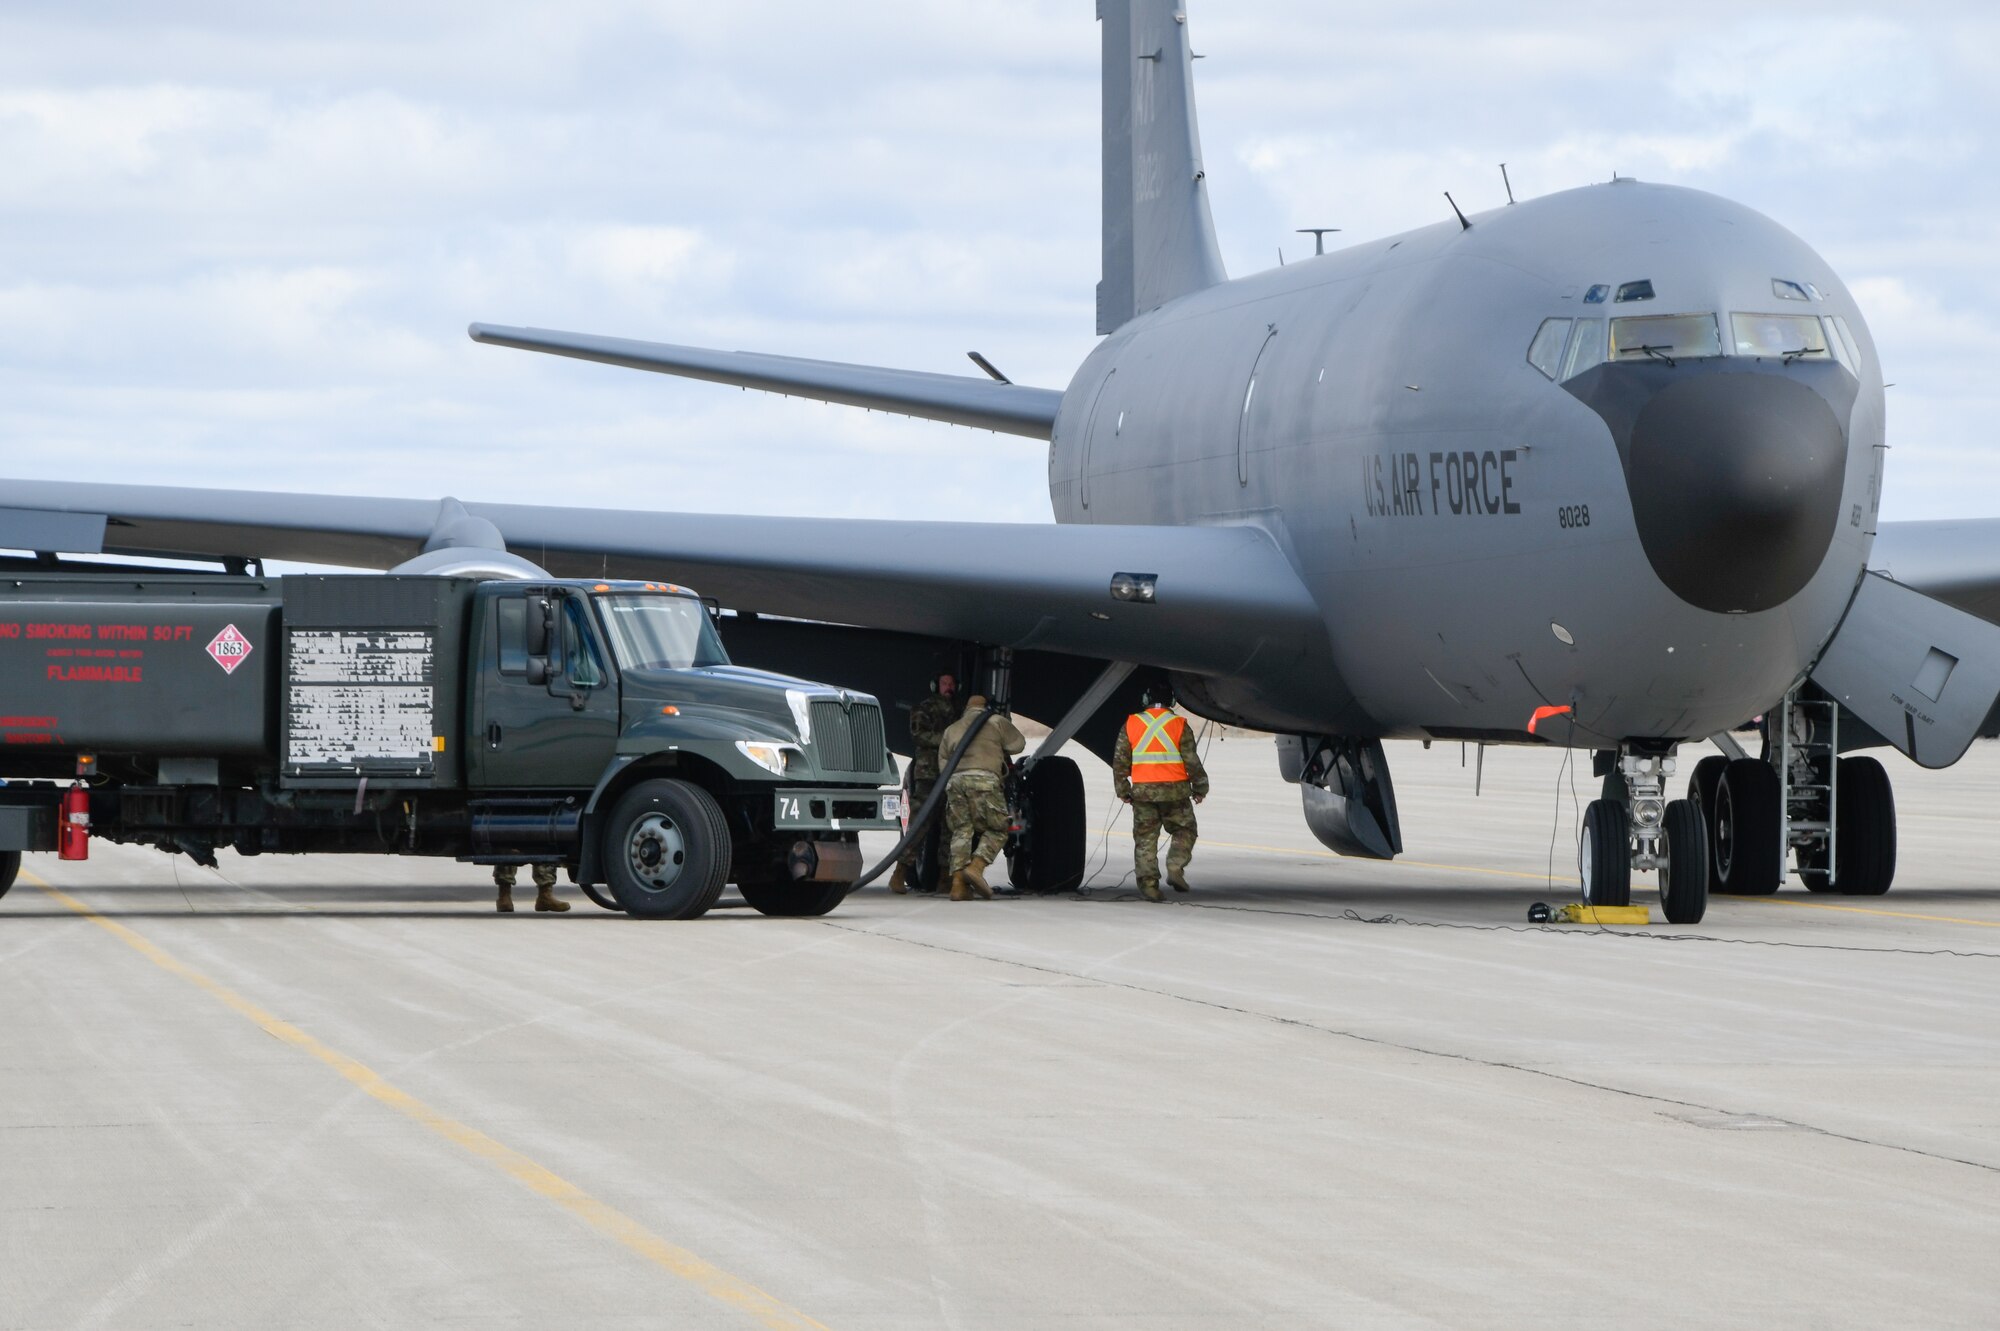 Airmen of the 168th Wing Logistics Readiness Squadron Fuels Management Flight and the 168th Wing Maintenance Group participated in hot pit refueling a KC-135 Stratotanker during a readiness exercise at Volk Field, Wisconsin, April 5, 2023. The hot pitting exercise was the first time the 168th LRS Fuels Management flight had taken part in hot pitting operations. Hot pitting occurs immediately after landing while engines are still running, reducing response times for the redeployment of the KC-135 Stratonker to continue air refueling operations generating combat air power. (U.S. Air National Guard photo by Senior Master Sgt. Julie Avey)